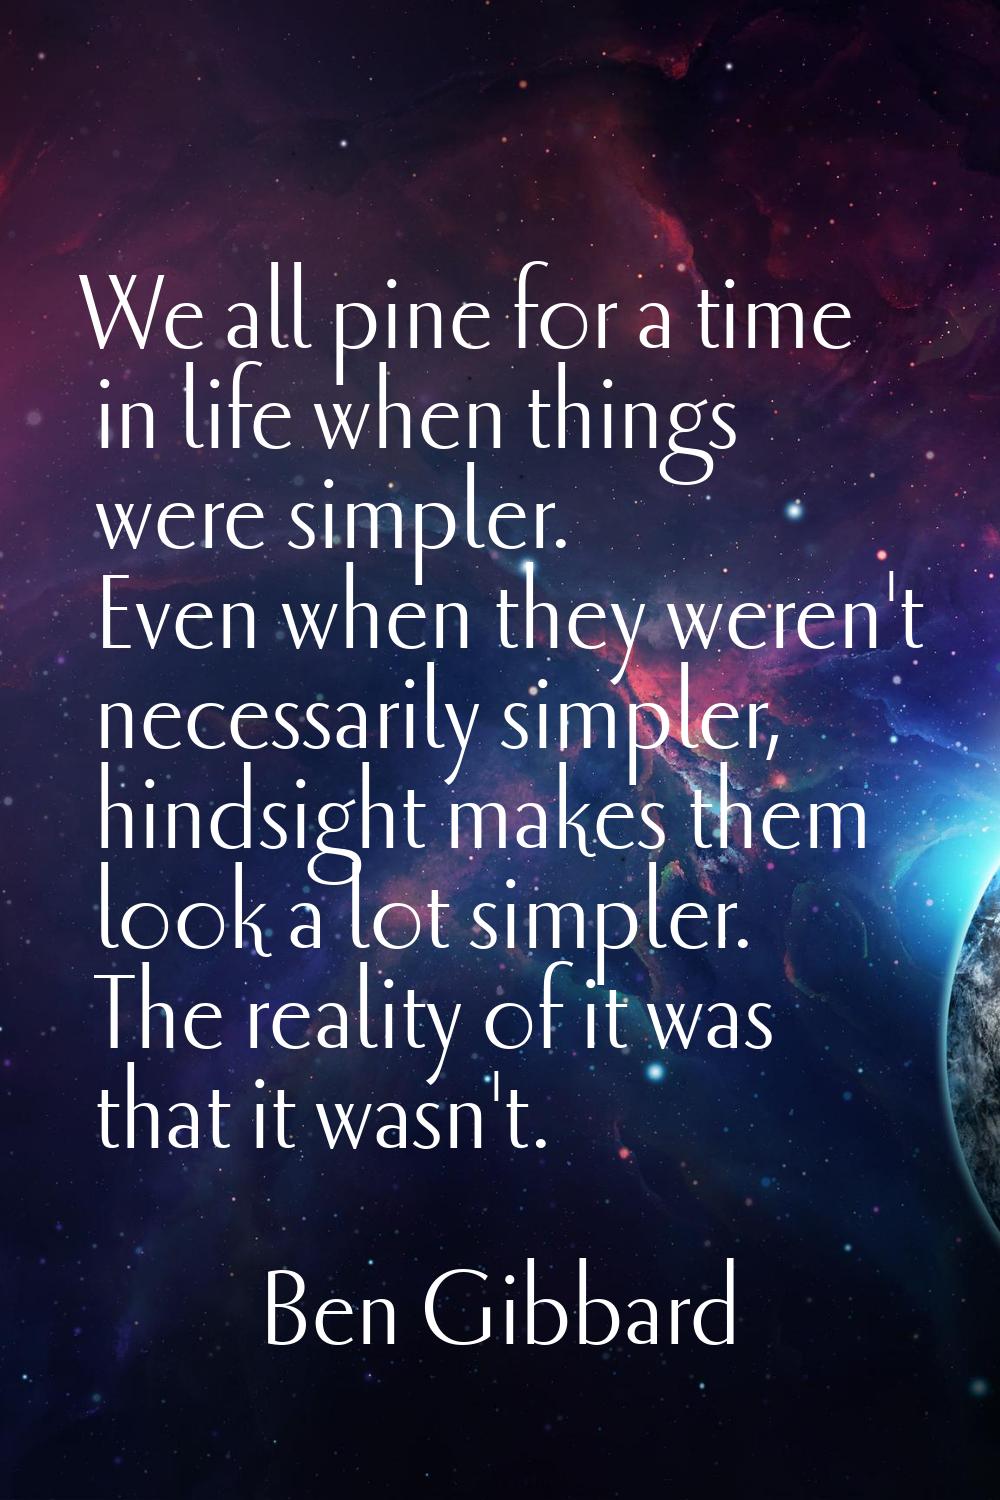 We all pine for a time in life when things were simpler. Even when they weren't necessarily simpler